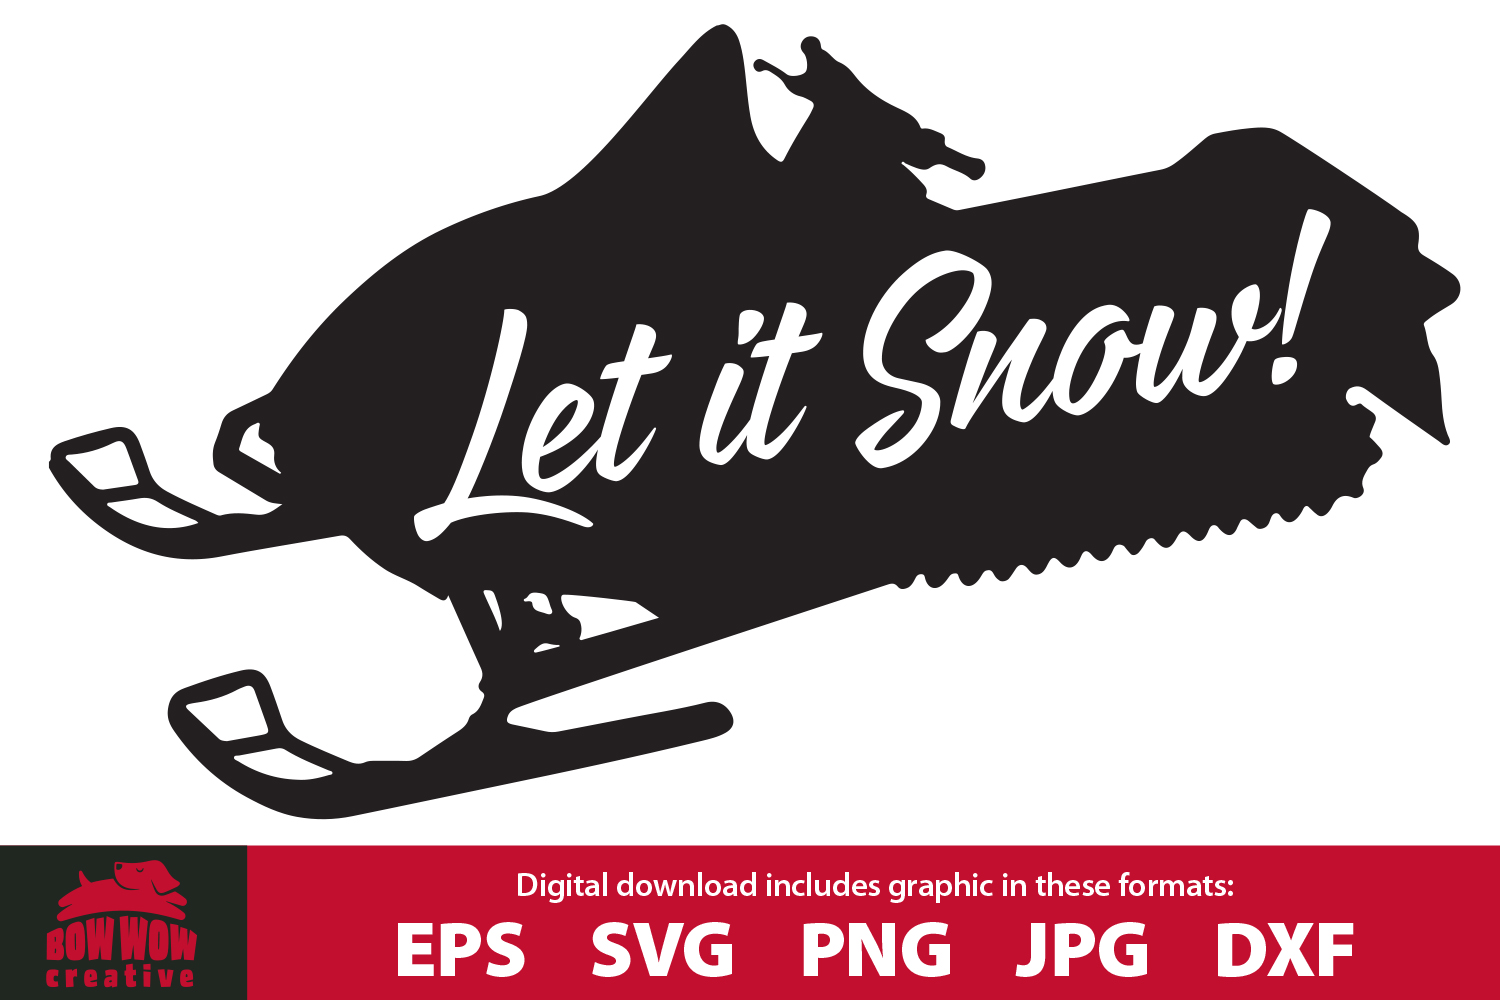 Download Let It Snow - Snowmobile SVG, EPS, JPG, PNG, DXF (463647 ...